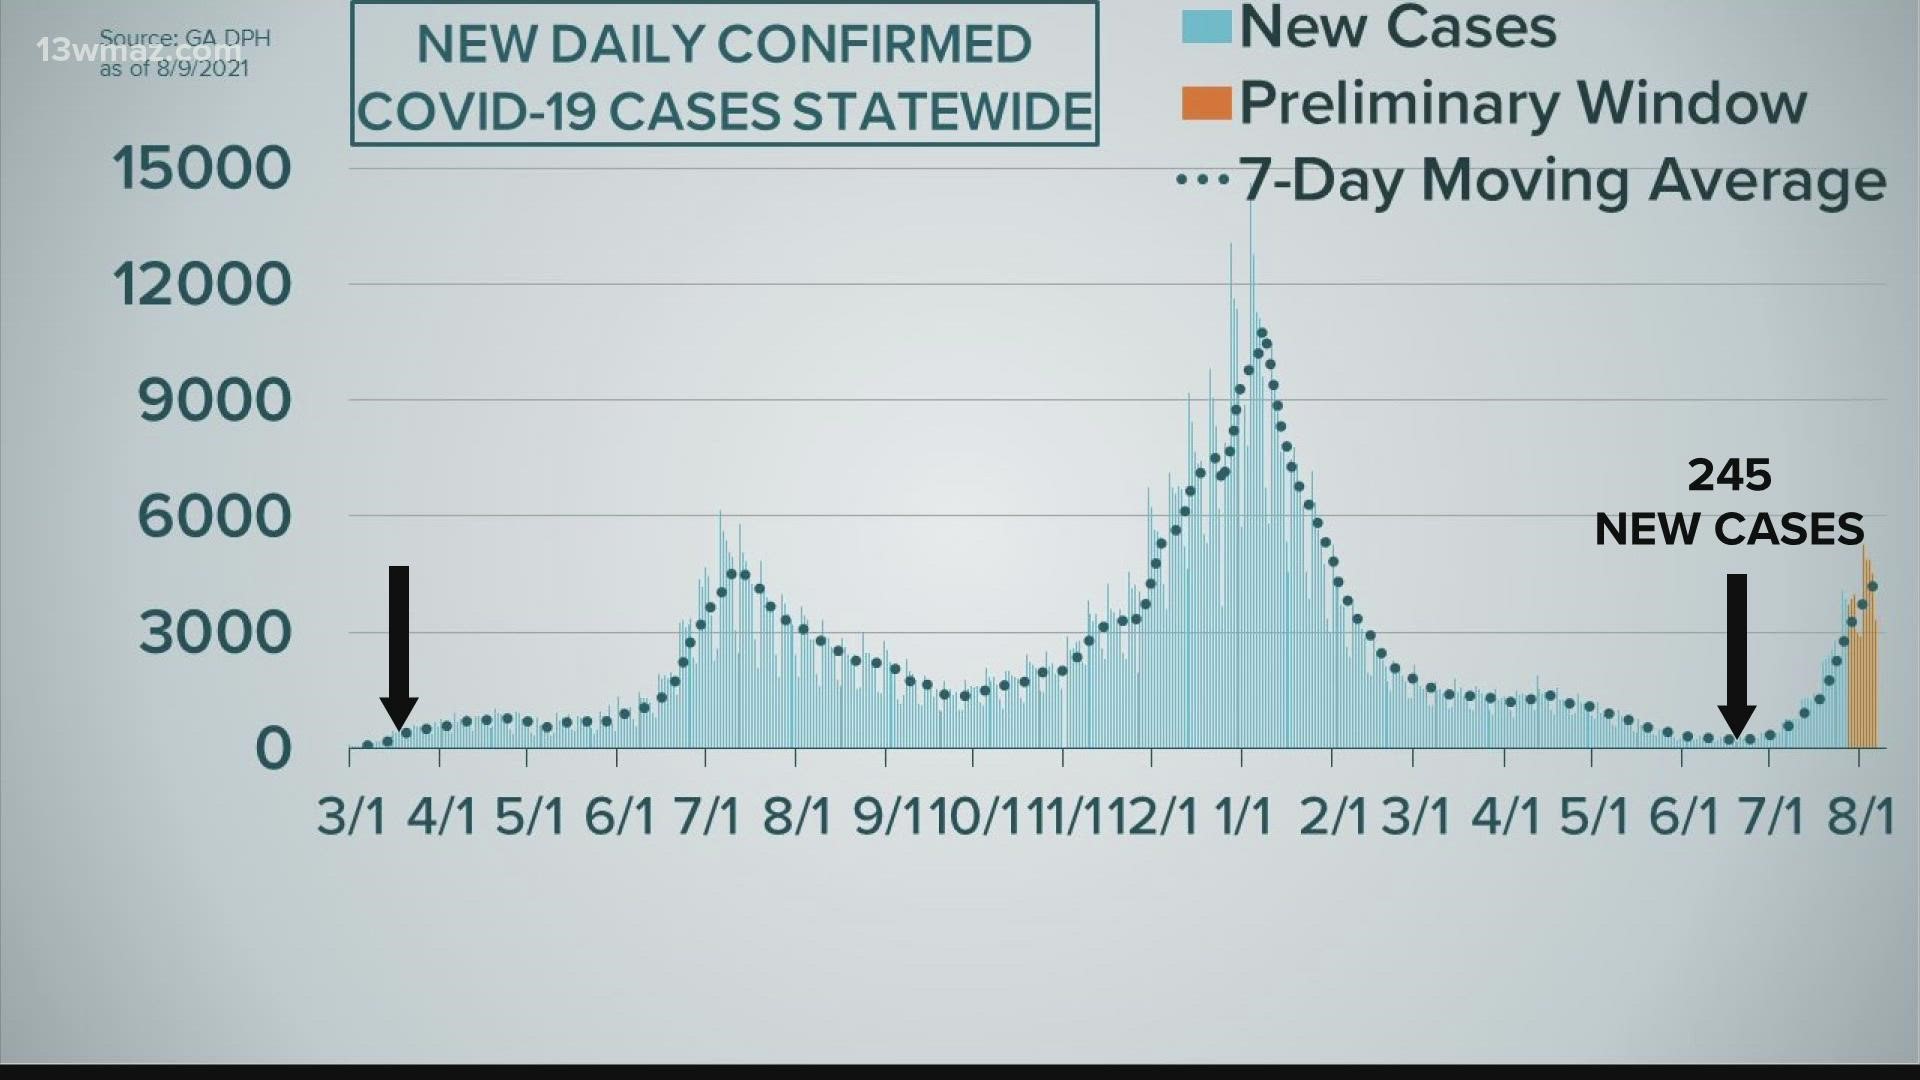 Georgia's daily average case count now sits close to numbers the state reported during the July 2020 peak.